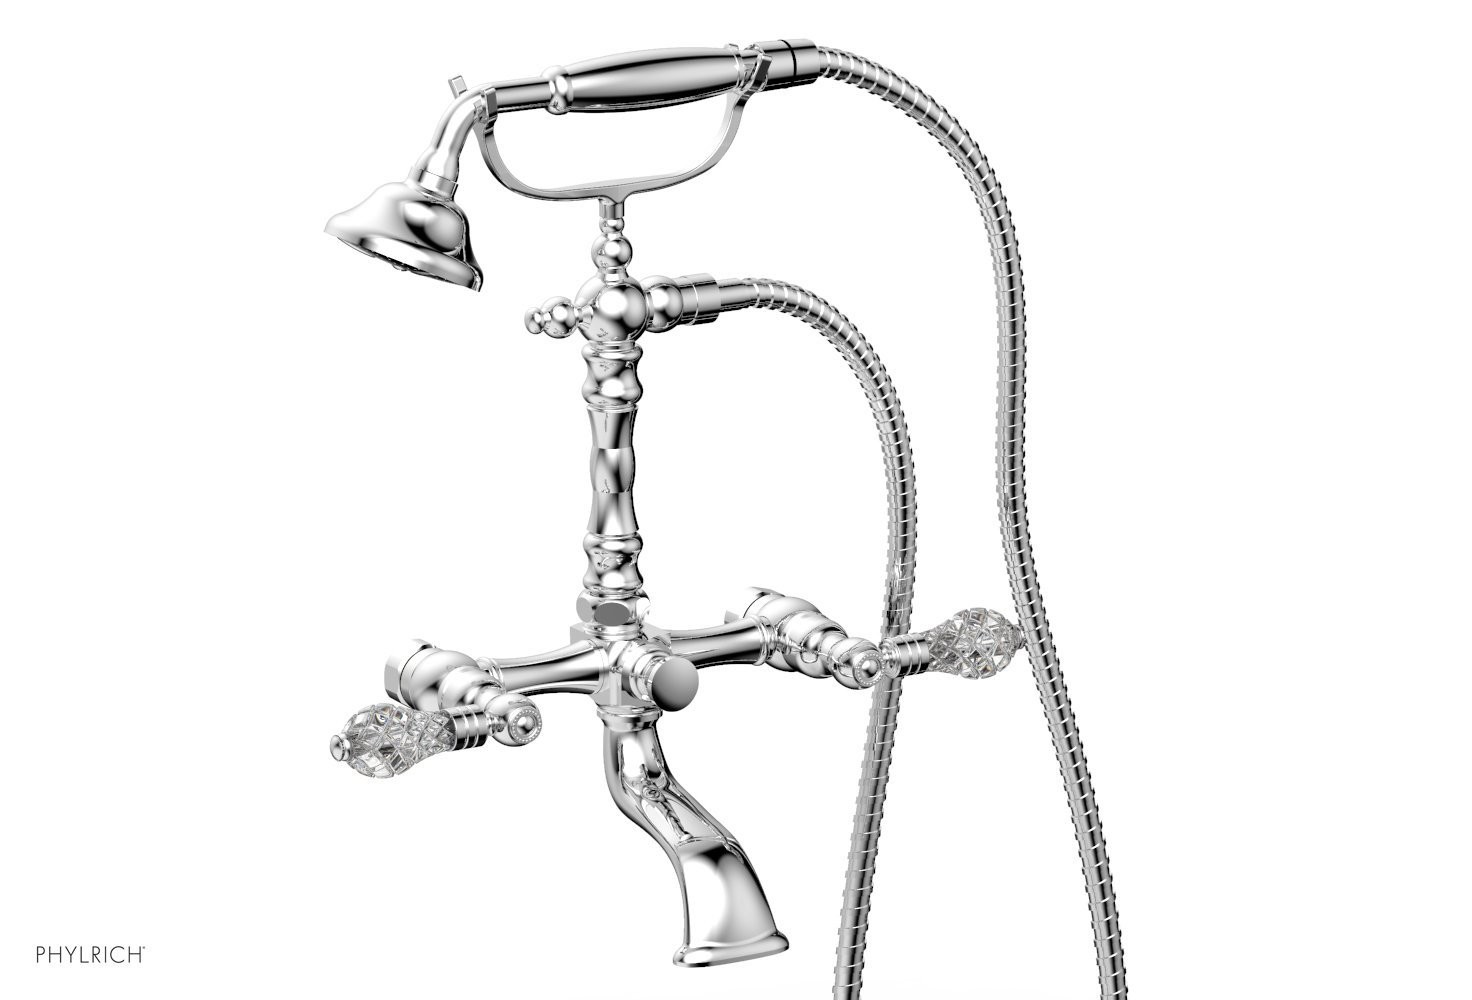 PHYLRICH K2393-16 CUT CRYSTAL TWO HOLES WALL MOUNT EXPOSED TUB FILLER WITH HAND SHOWER AND LEVER HANDLE